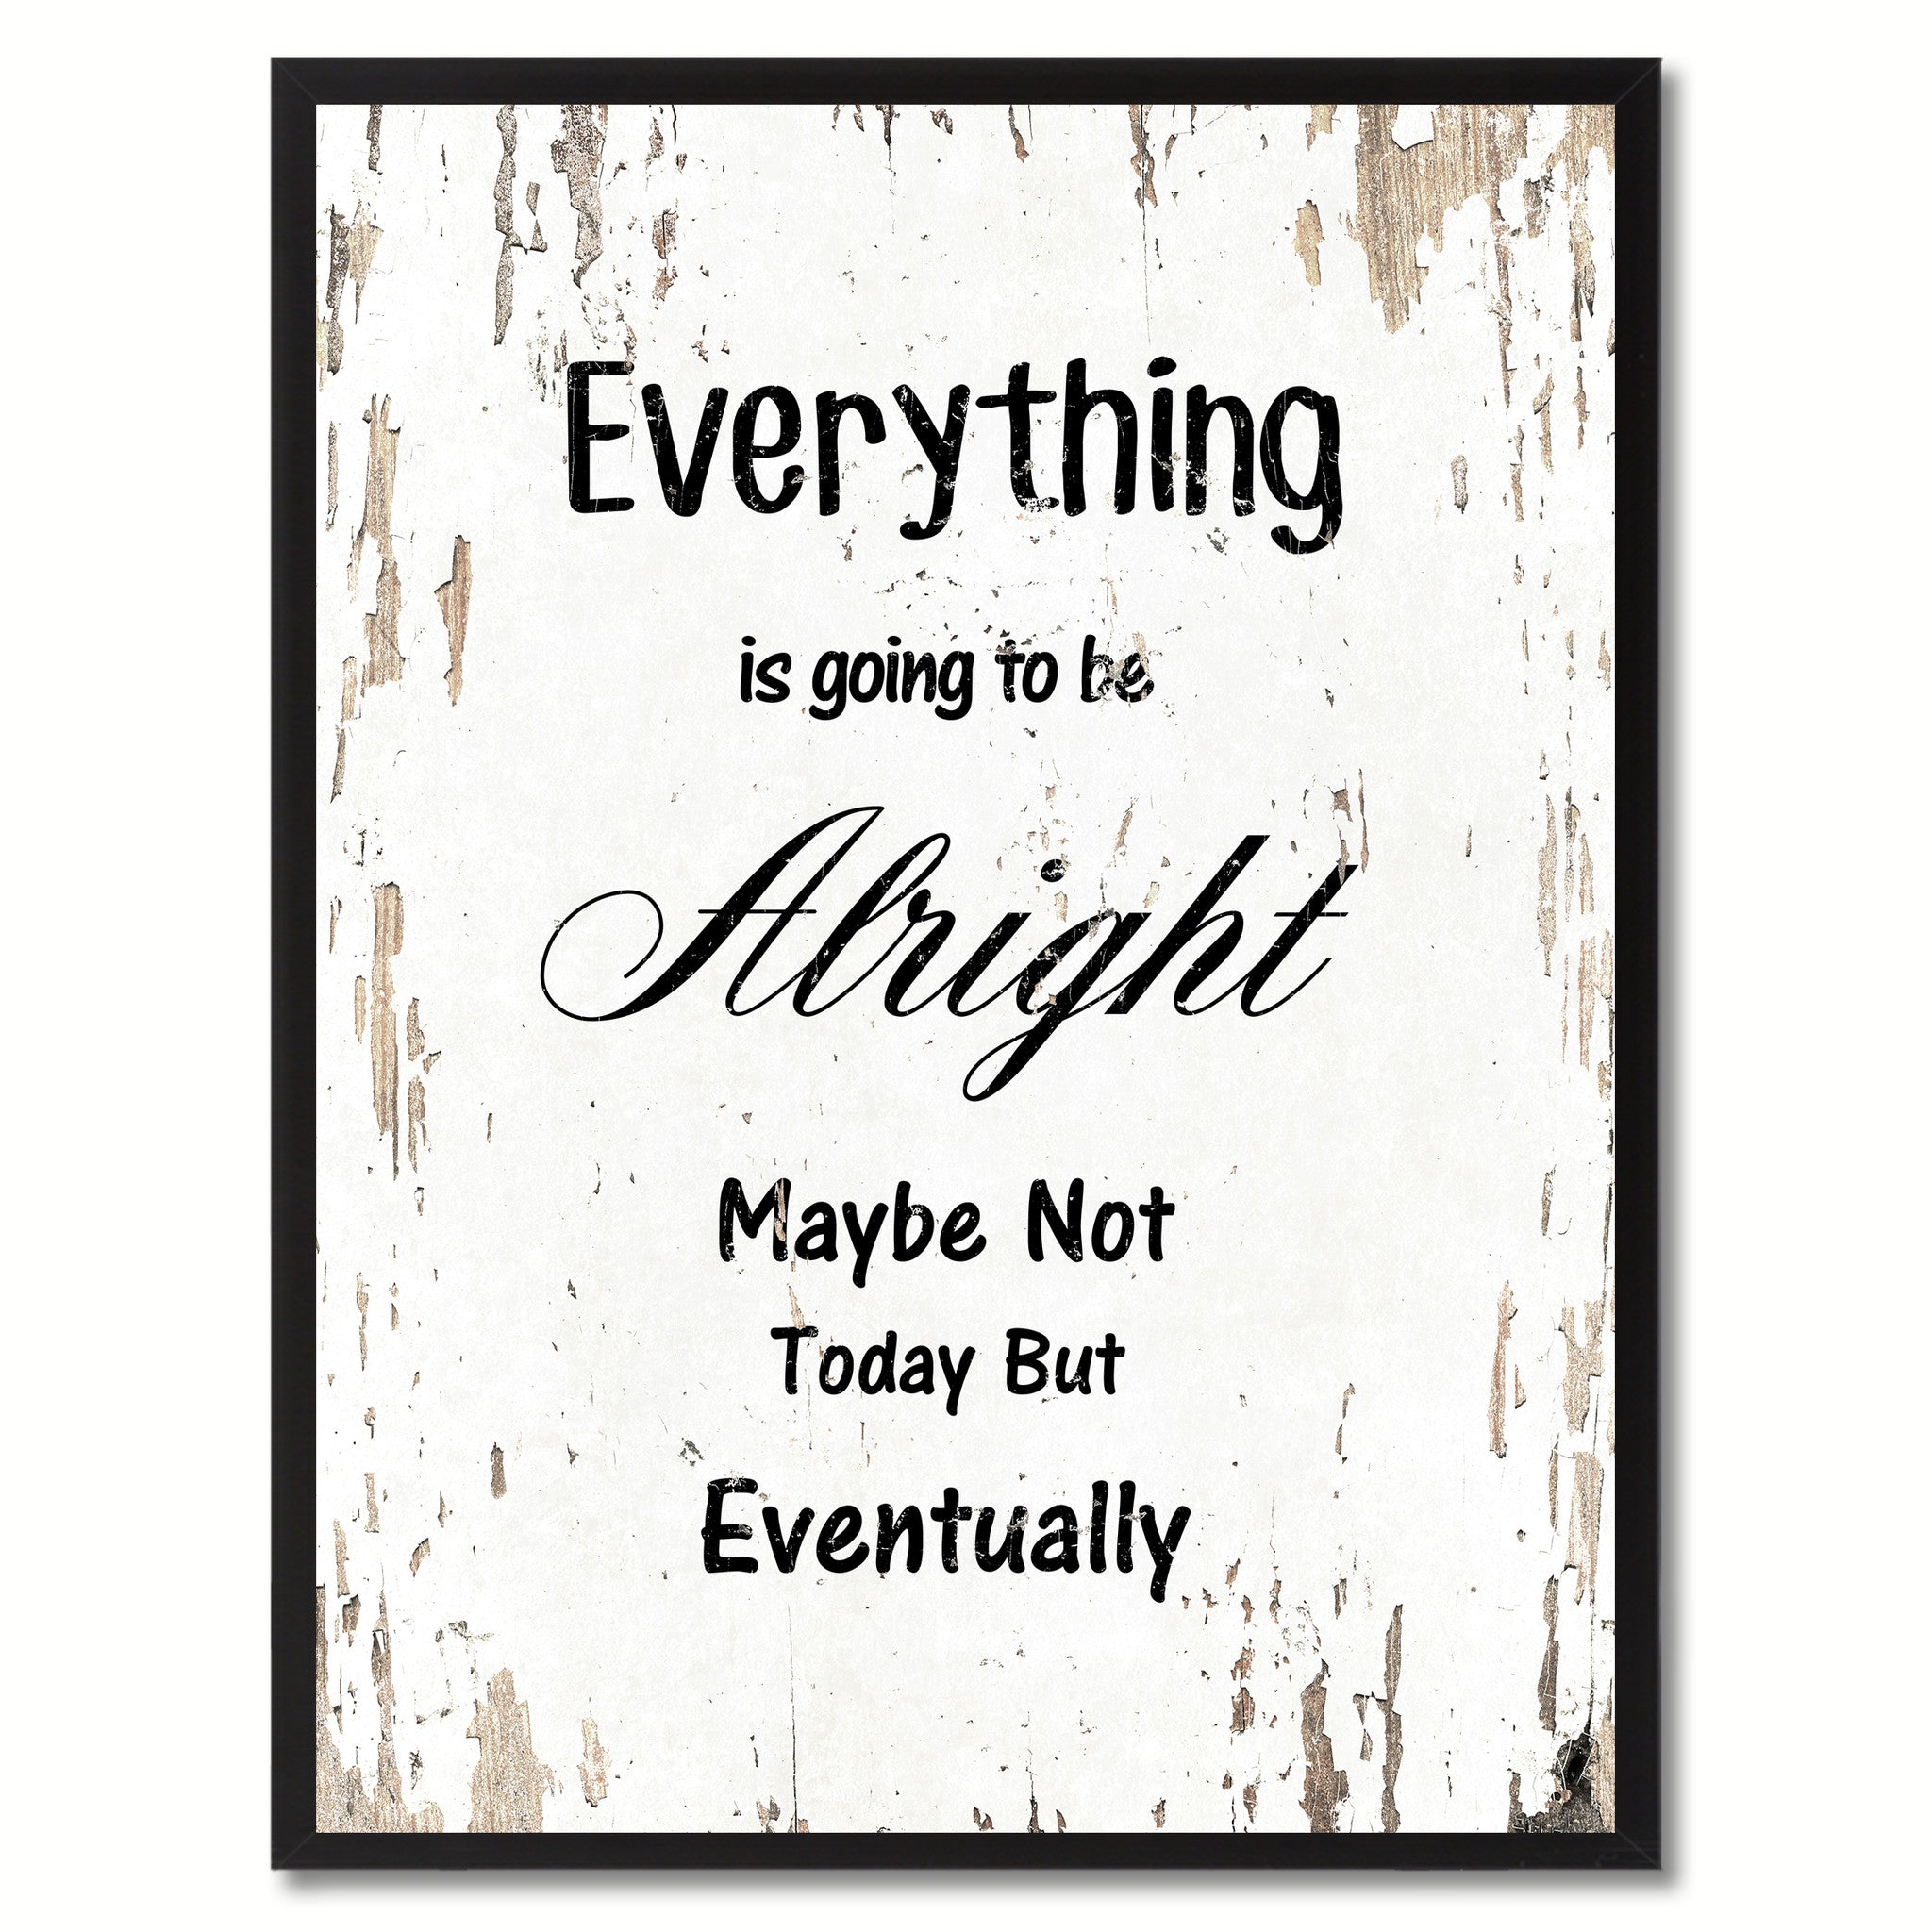 Everything is going to be alright maybe not today but eventually Motivation Quote Saying Gift Ideas Home Decor Wall Art